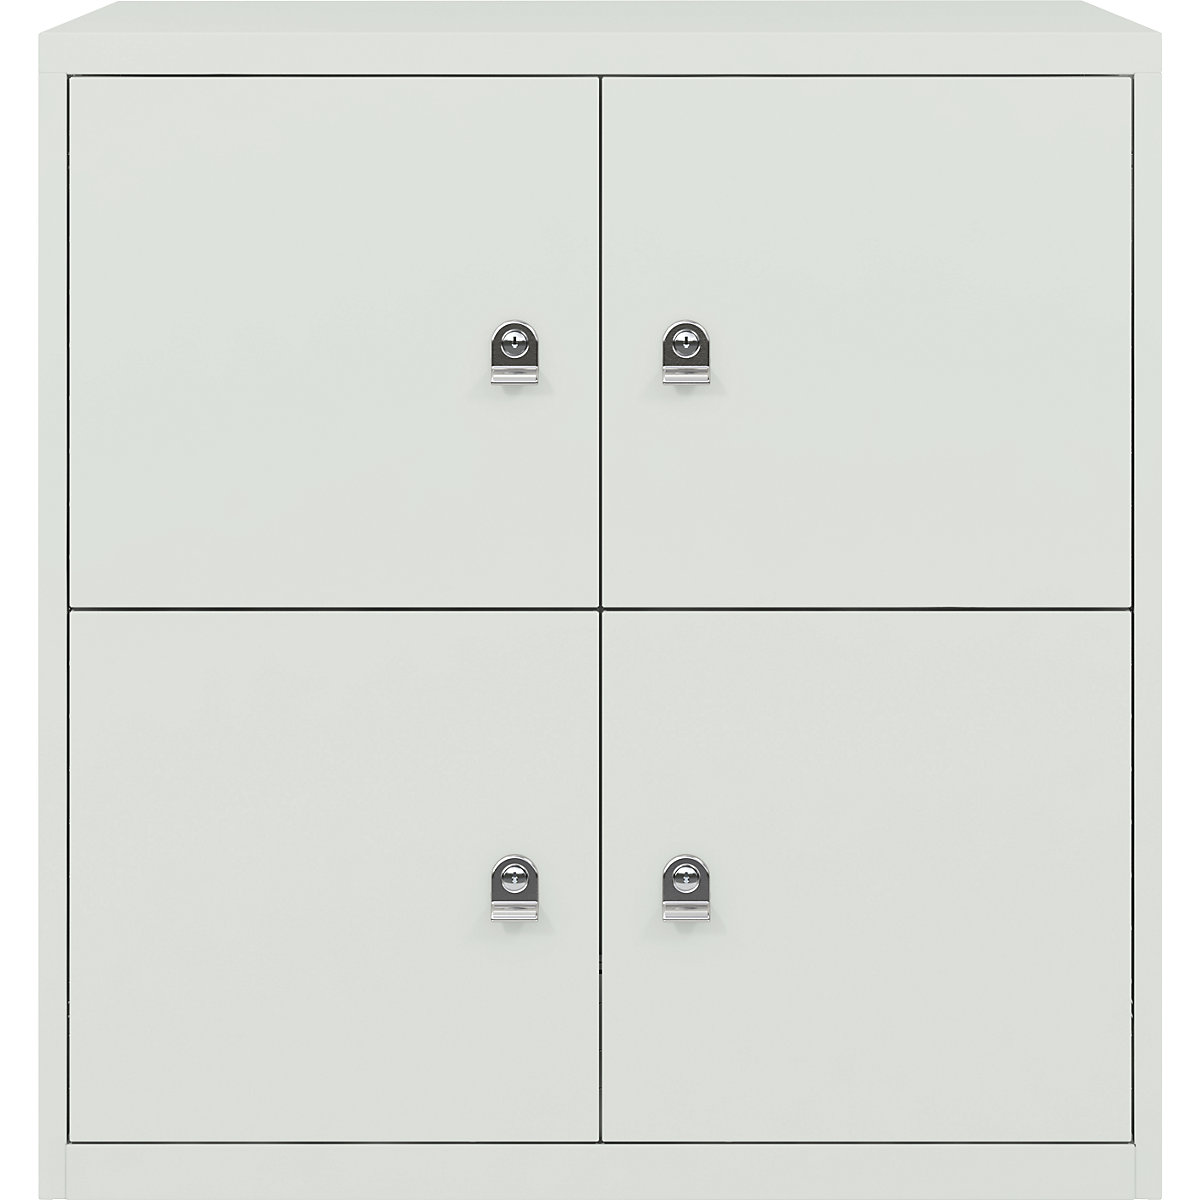 BISLEY – LateralFile™ lodge, with 4 lockable compartments, height 375 mm each, portland